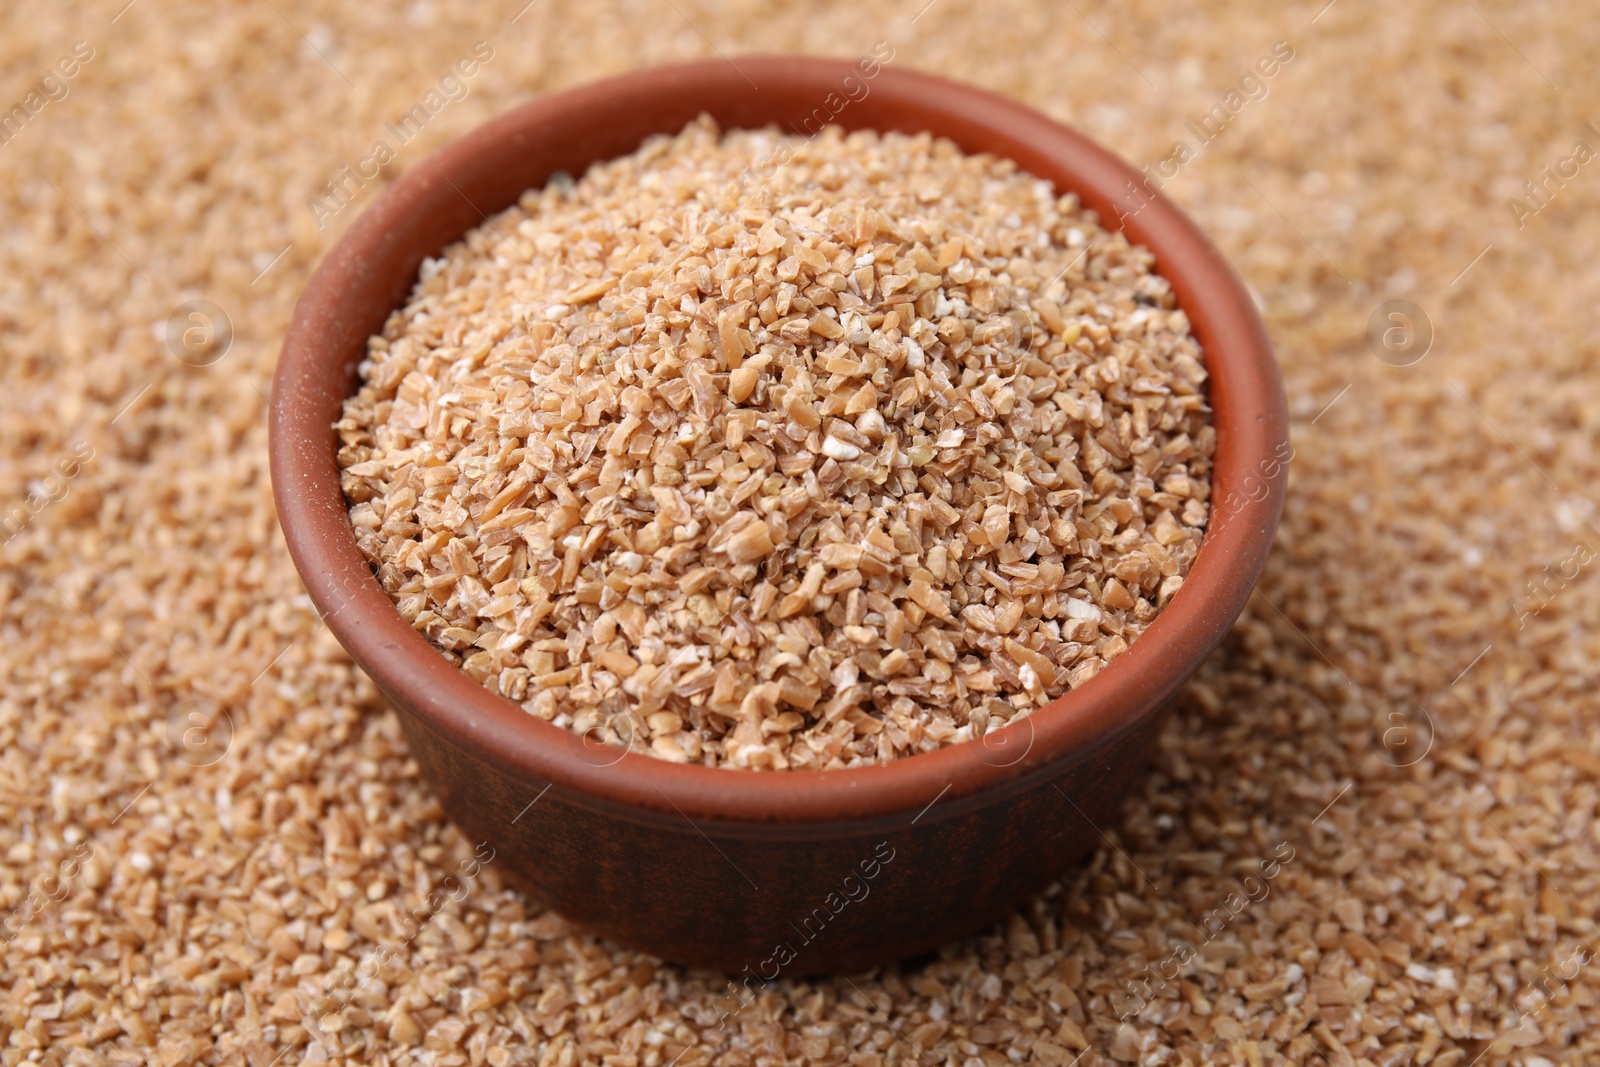 Photo of Bowl and dry wheat groats, closeup view